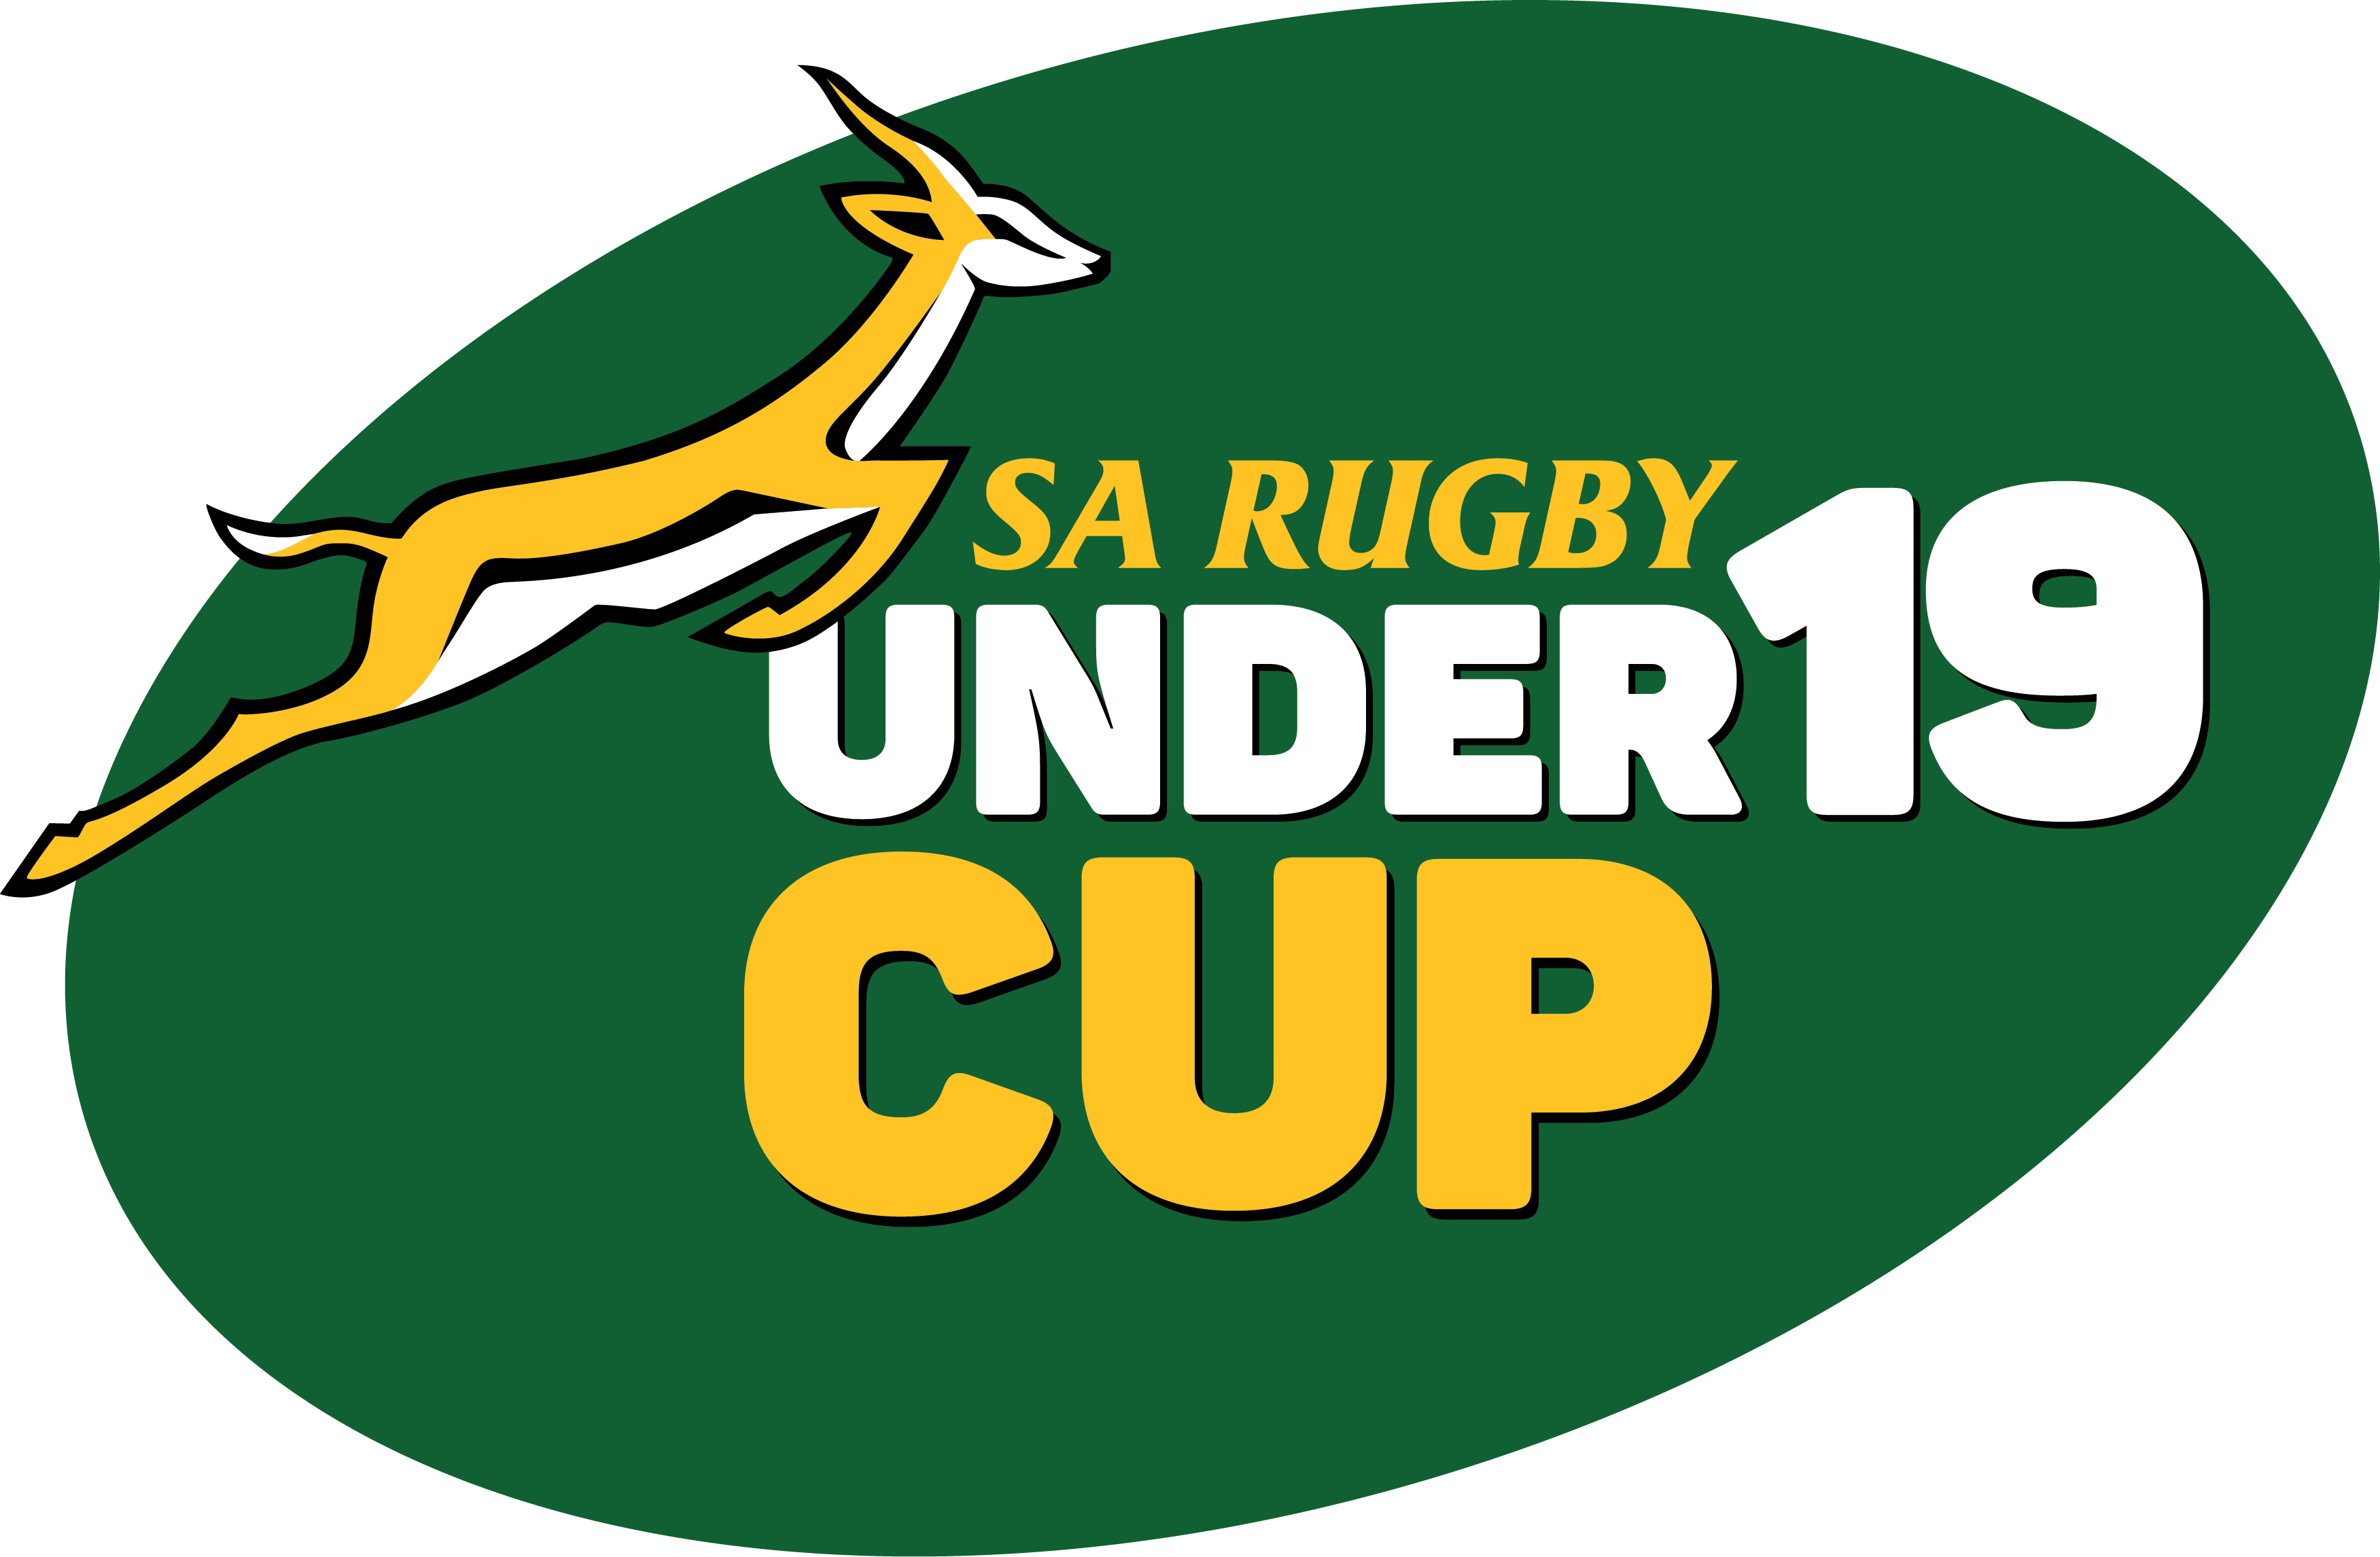 SA RUGBY UNDER-19 CUP